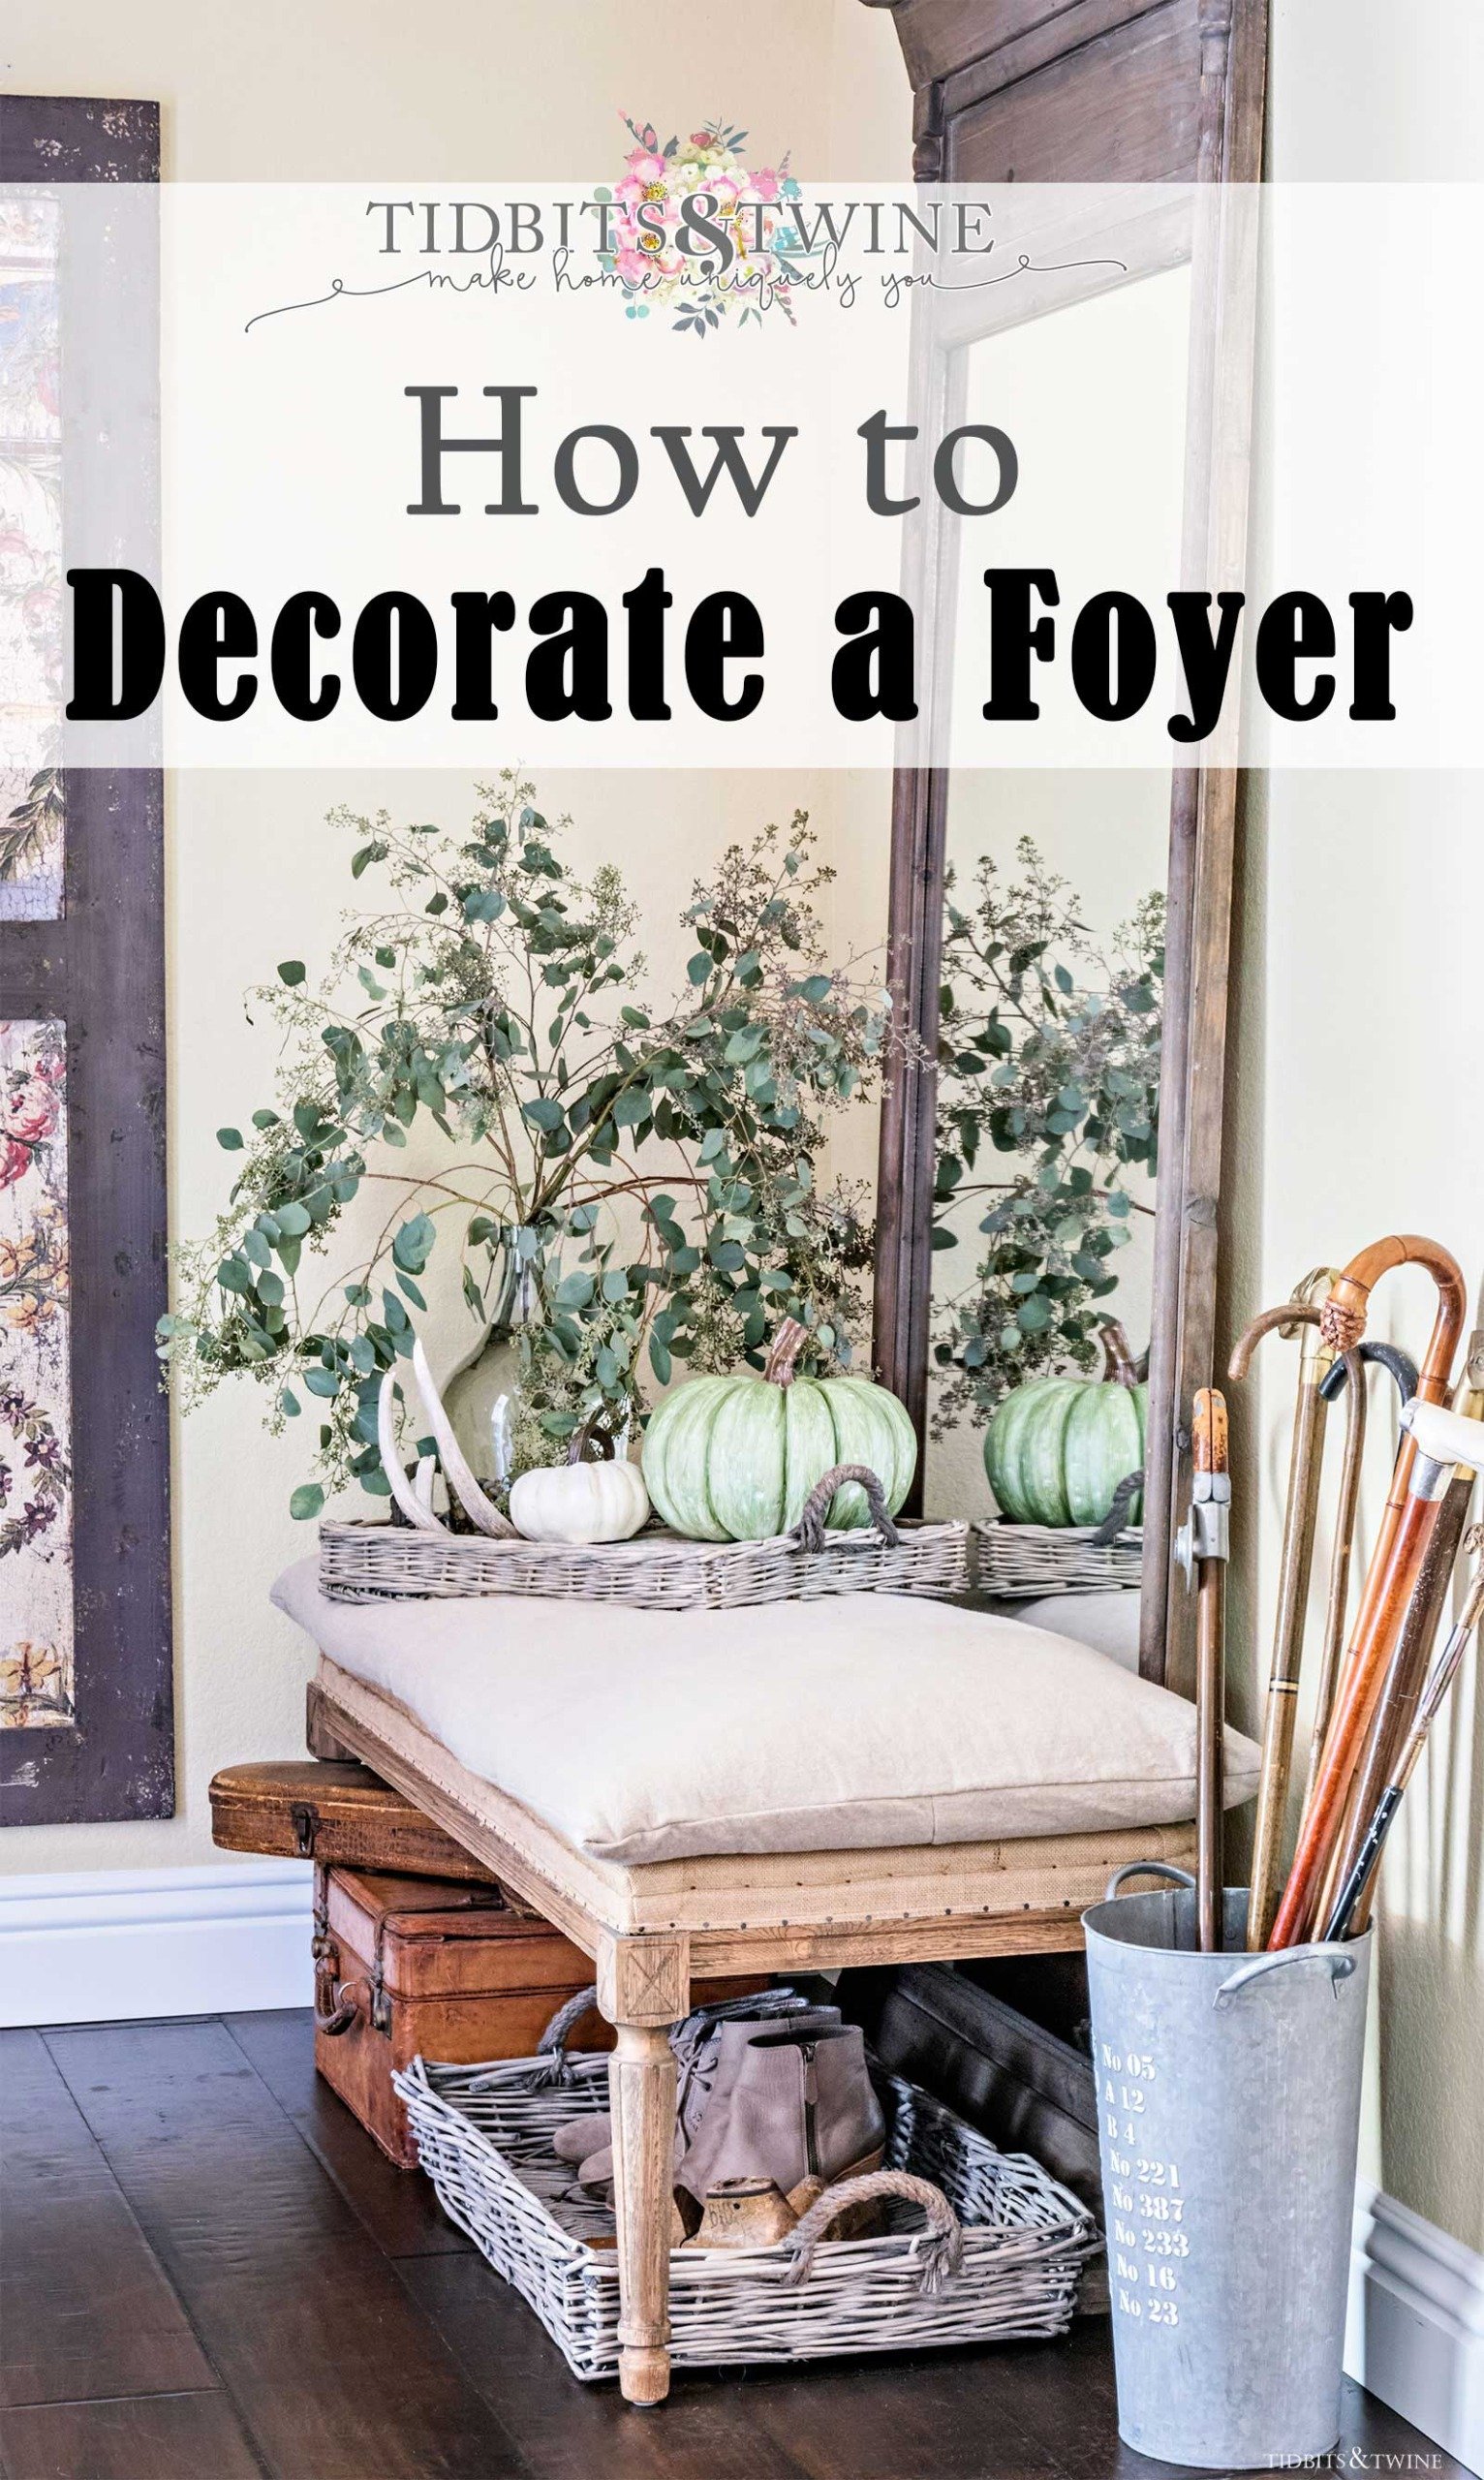 How to Decorate A Foyer: Tips for Function & Fluff